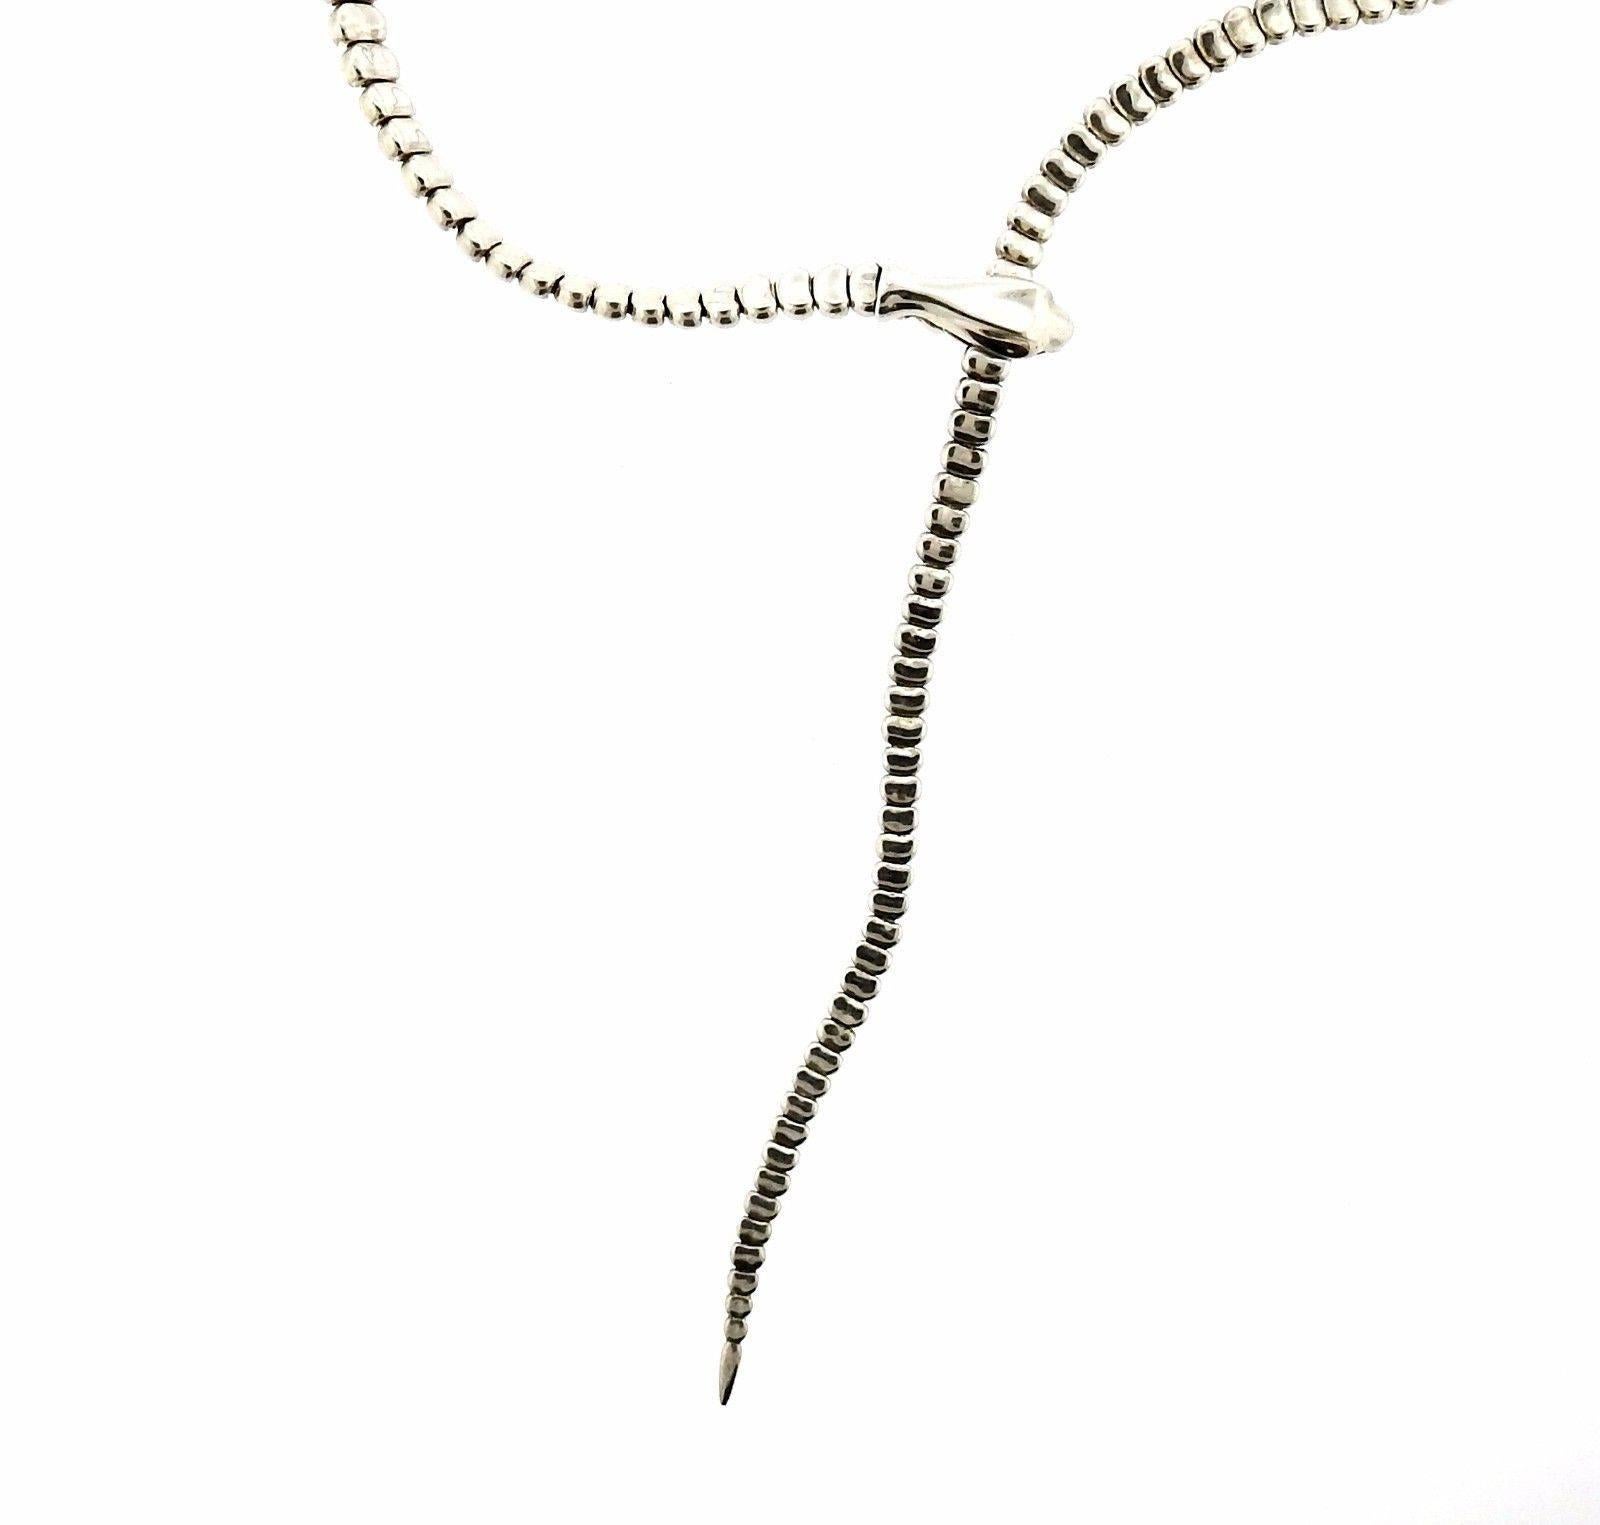 A sterling silver snake necklace by Elsa Peretti for Tiffany & Co.  The necklace length is adjustable up to 20